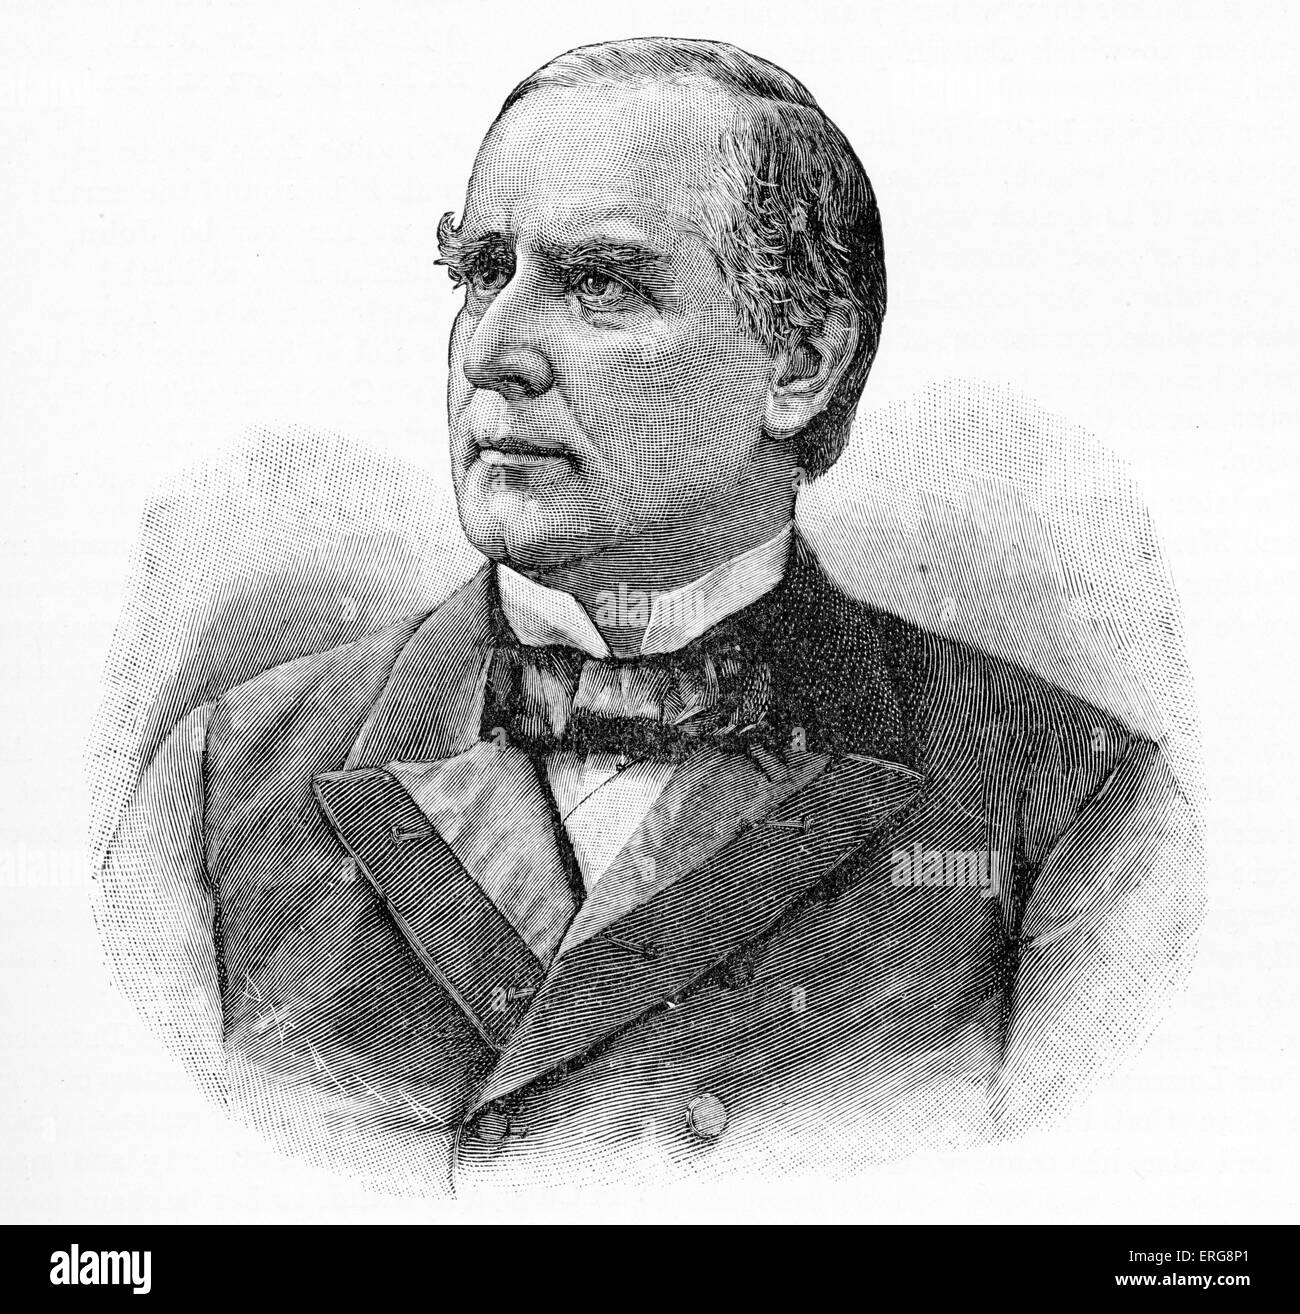 President McKinley, 25th President of the USA from 1897-1901. William McKinley, Jr.: Republican, b. January 1843 - d. September 1901 Stock Photo